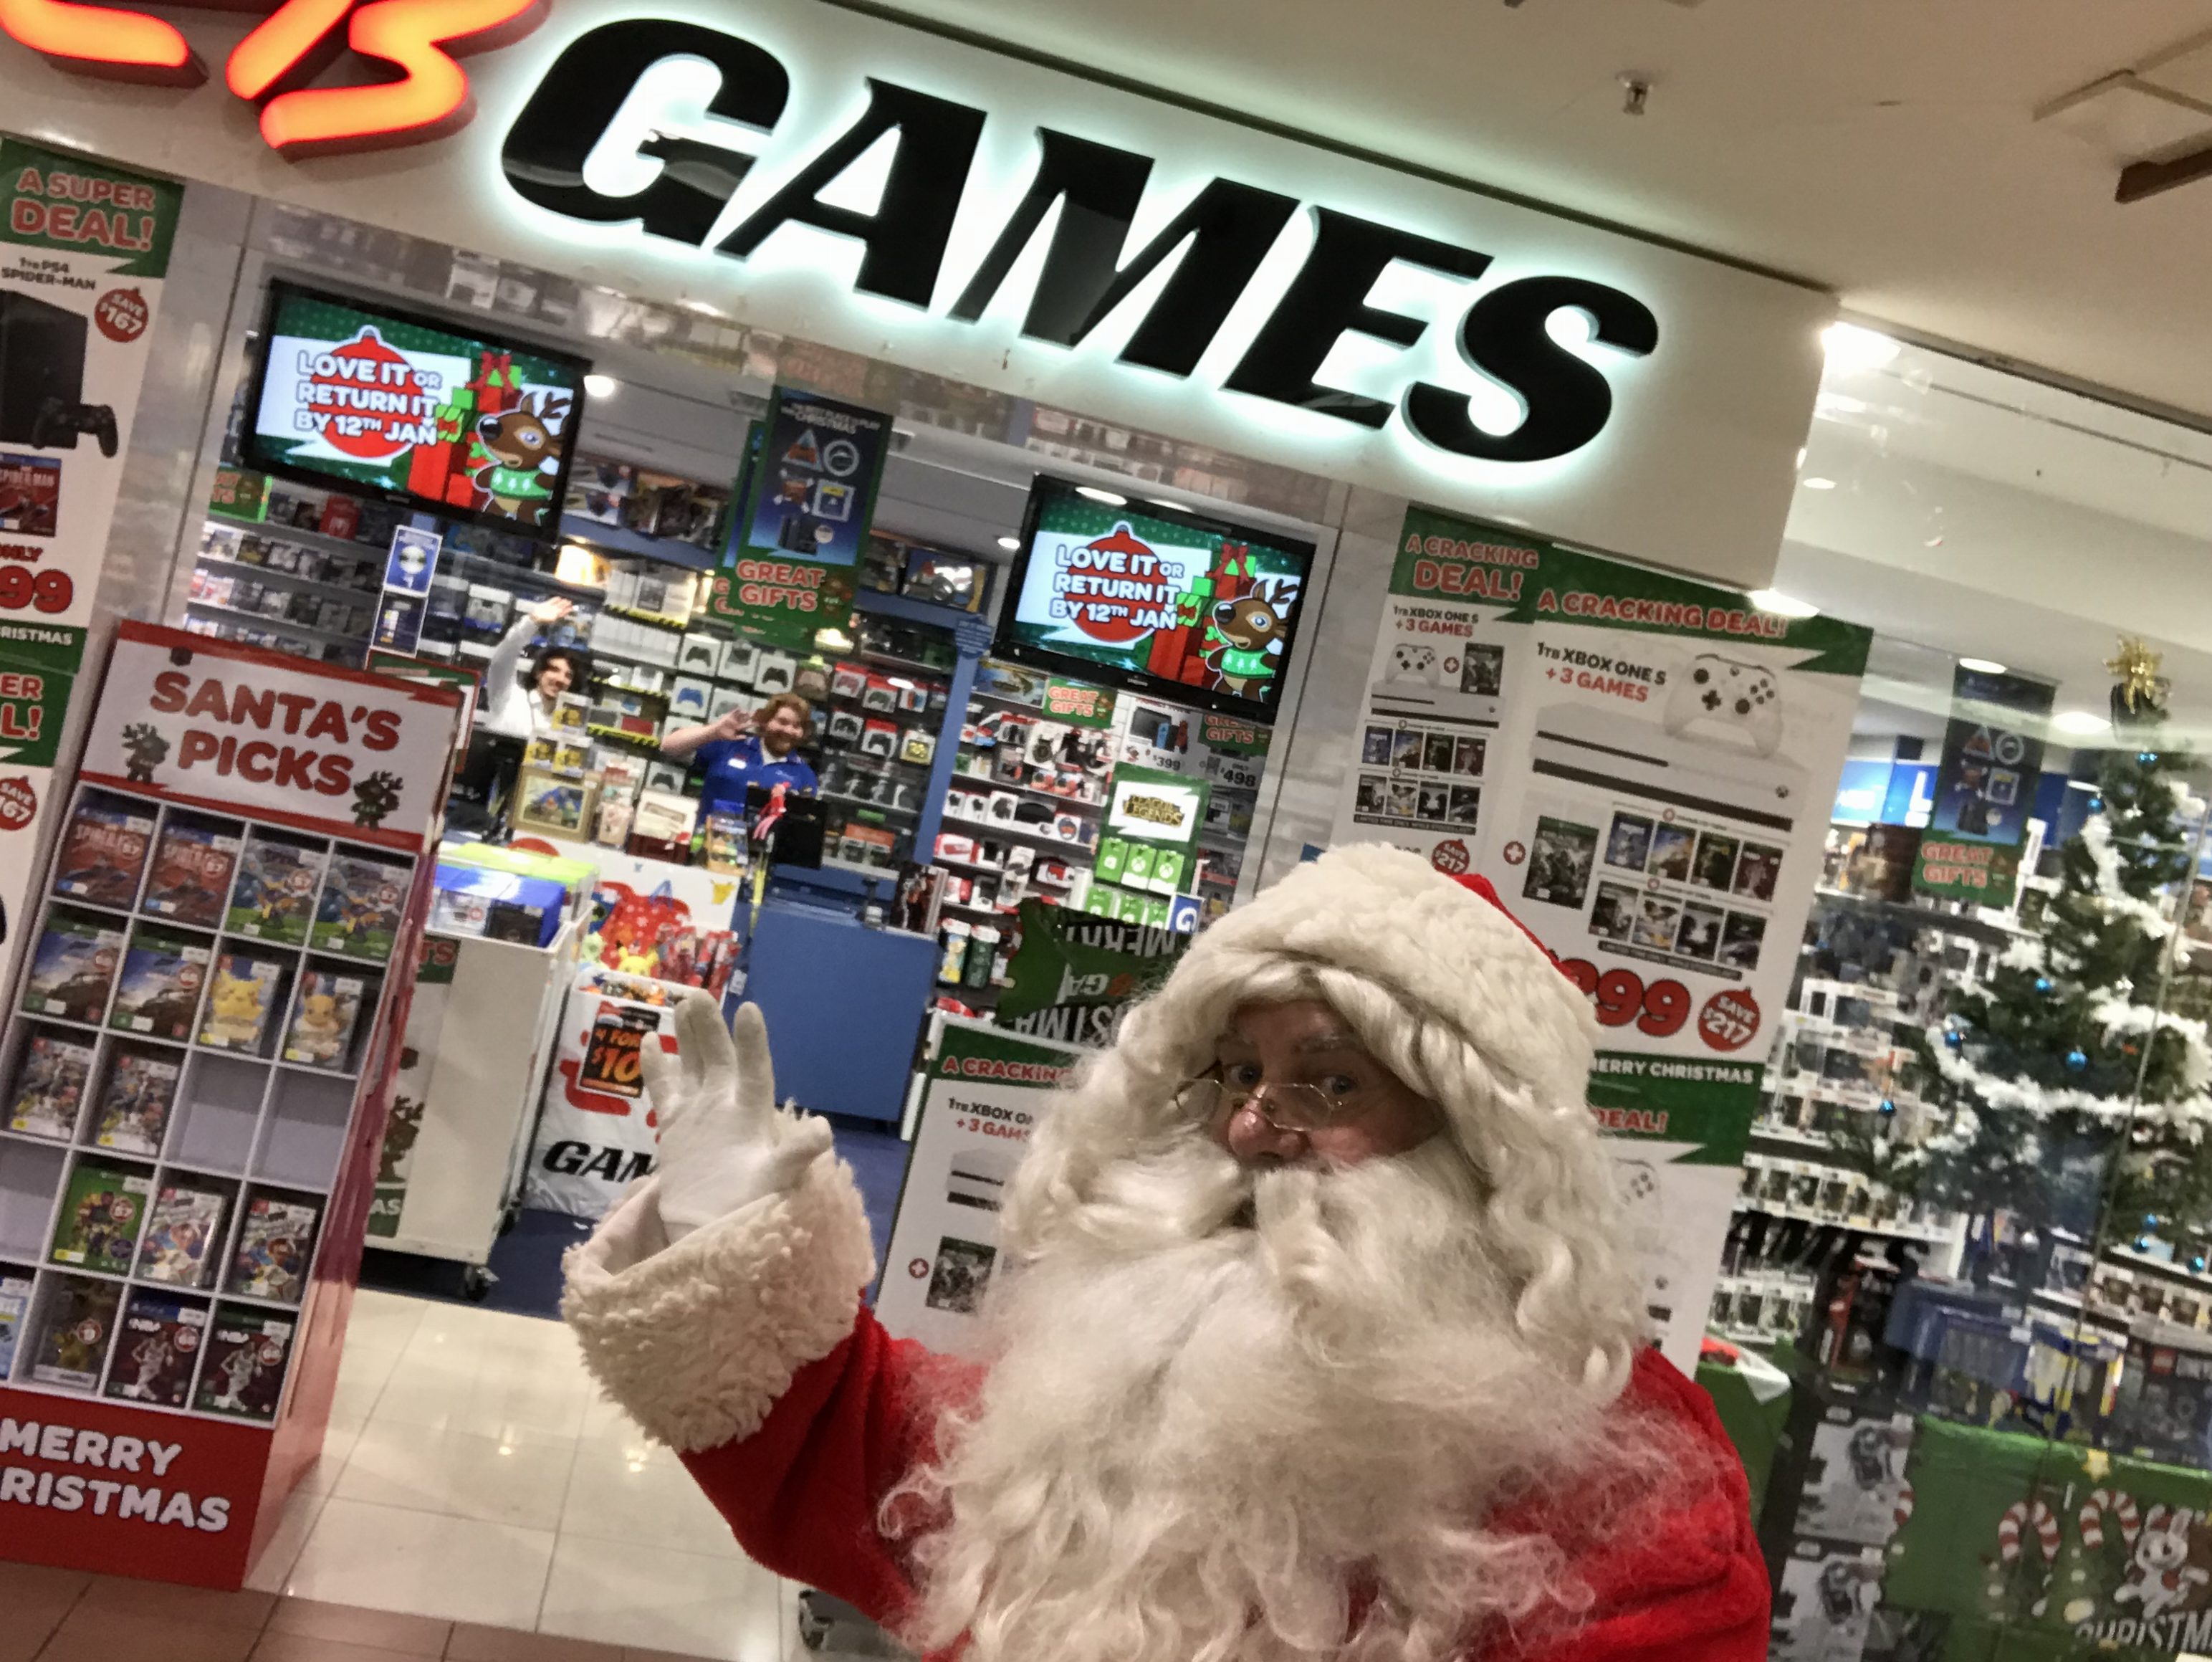 Santa’s Elves have been busy at EB Games